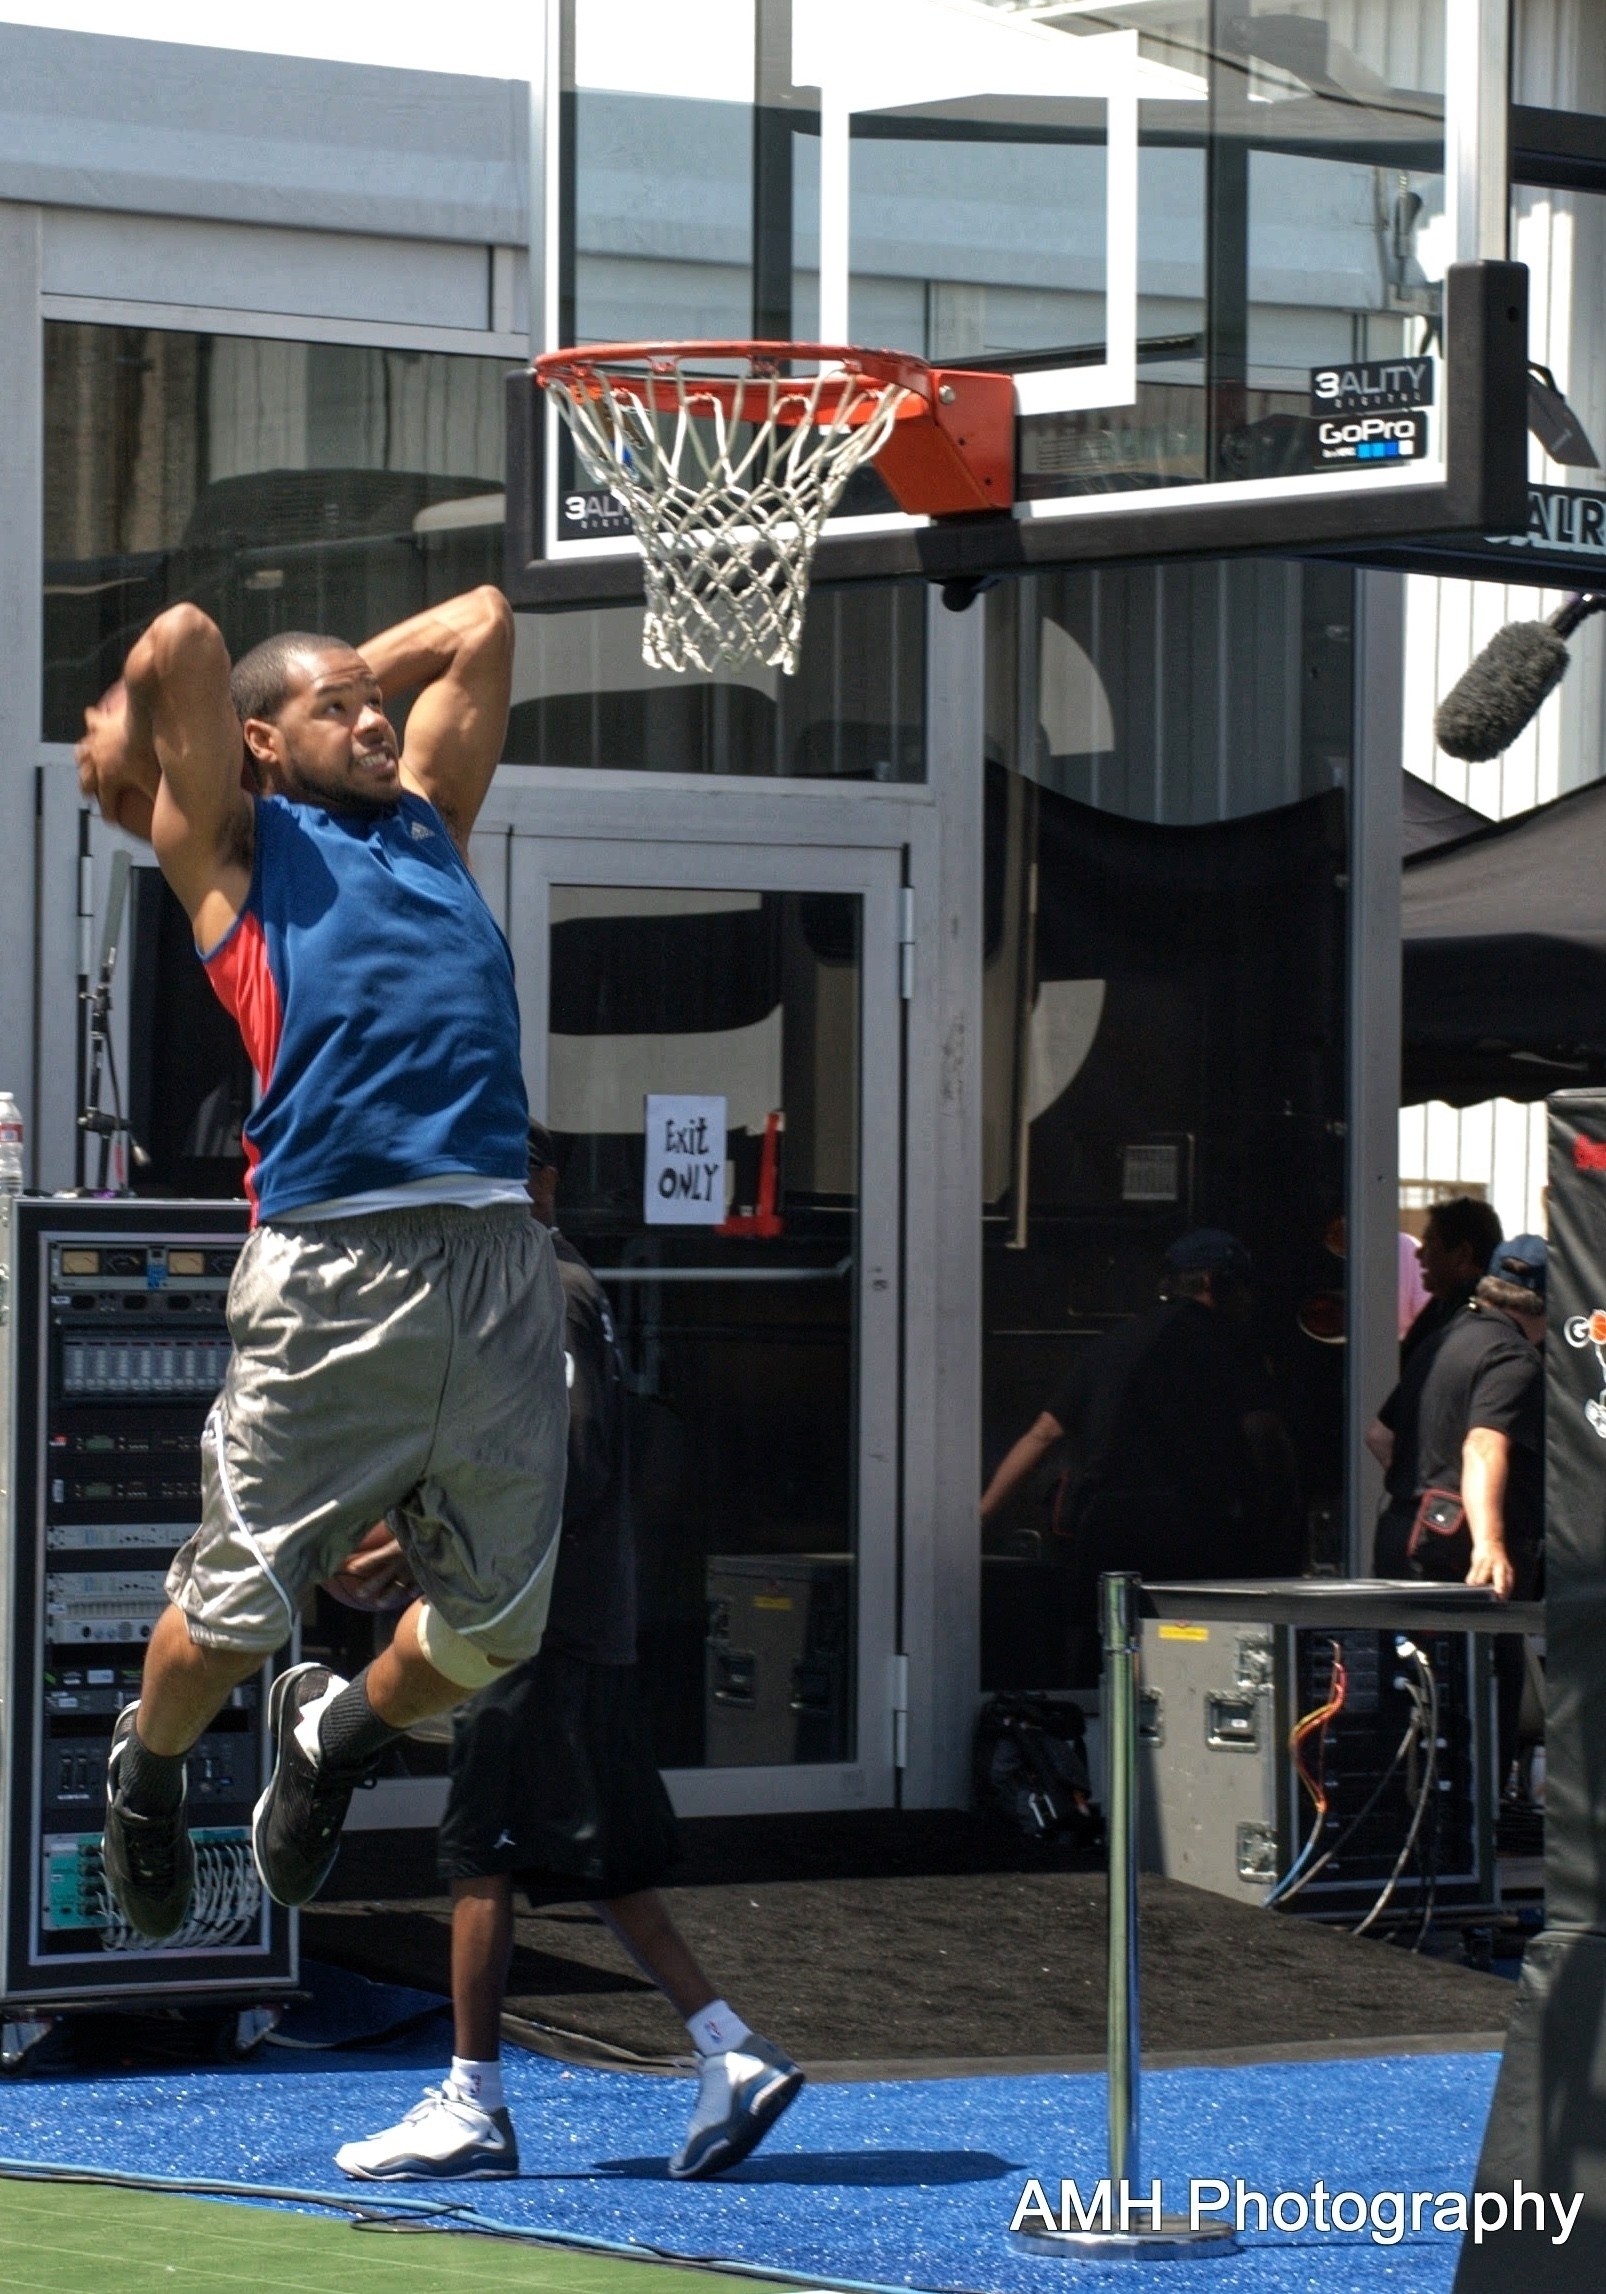 A Black man mid-flight to dunking on a basketball ball court. 